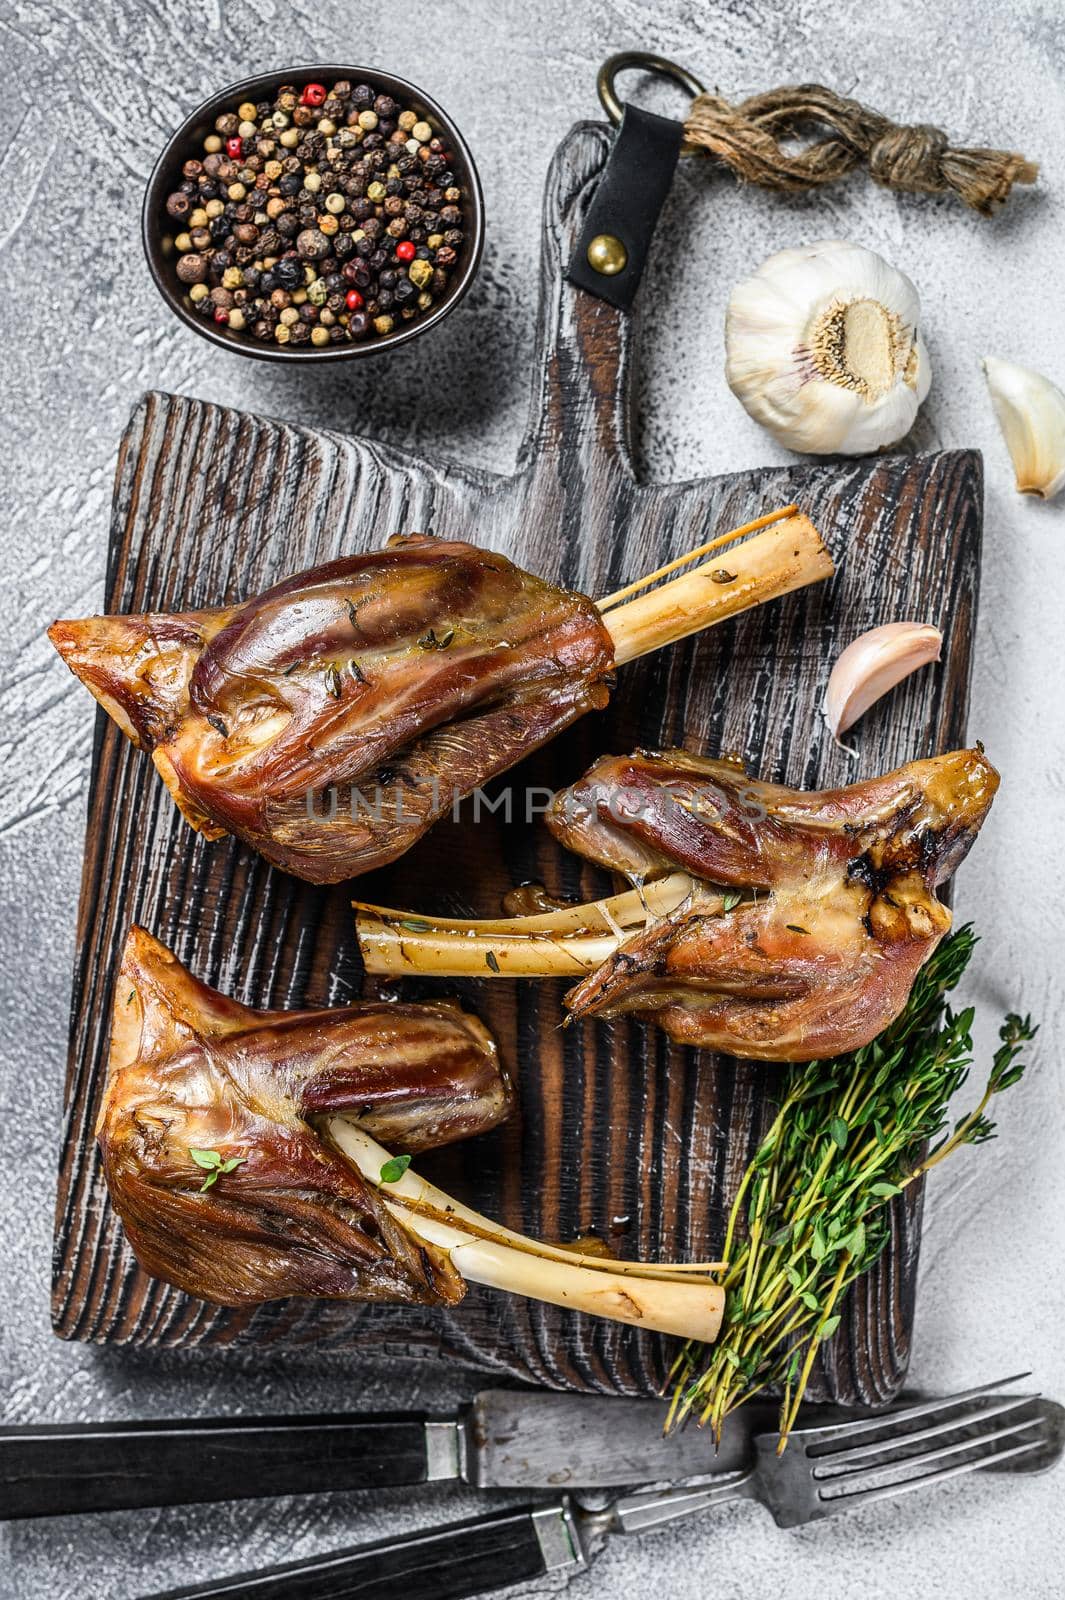 Braised roast Lamb Shanks on a wooden cutting board. White background. Top view.